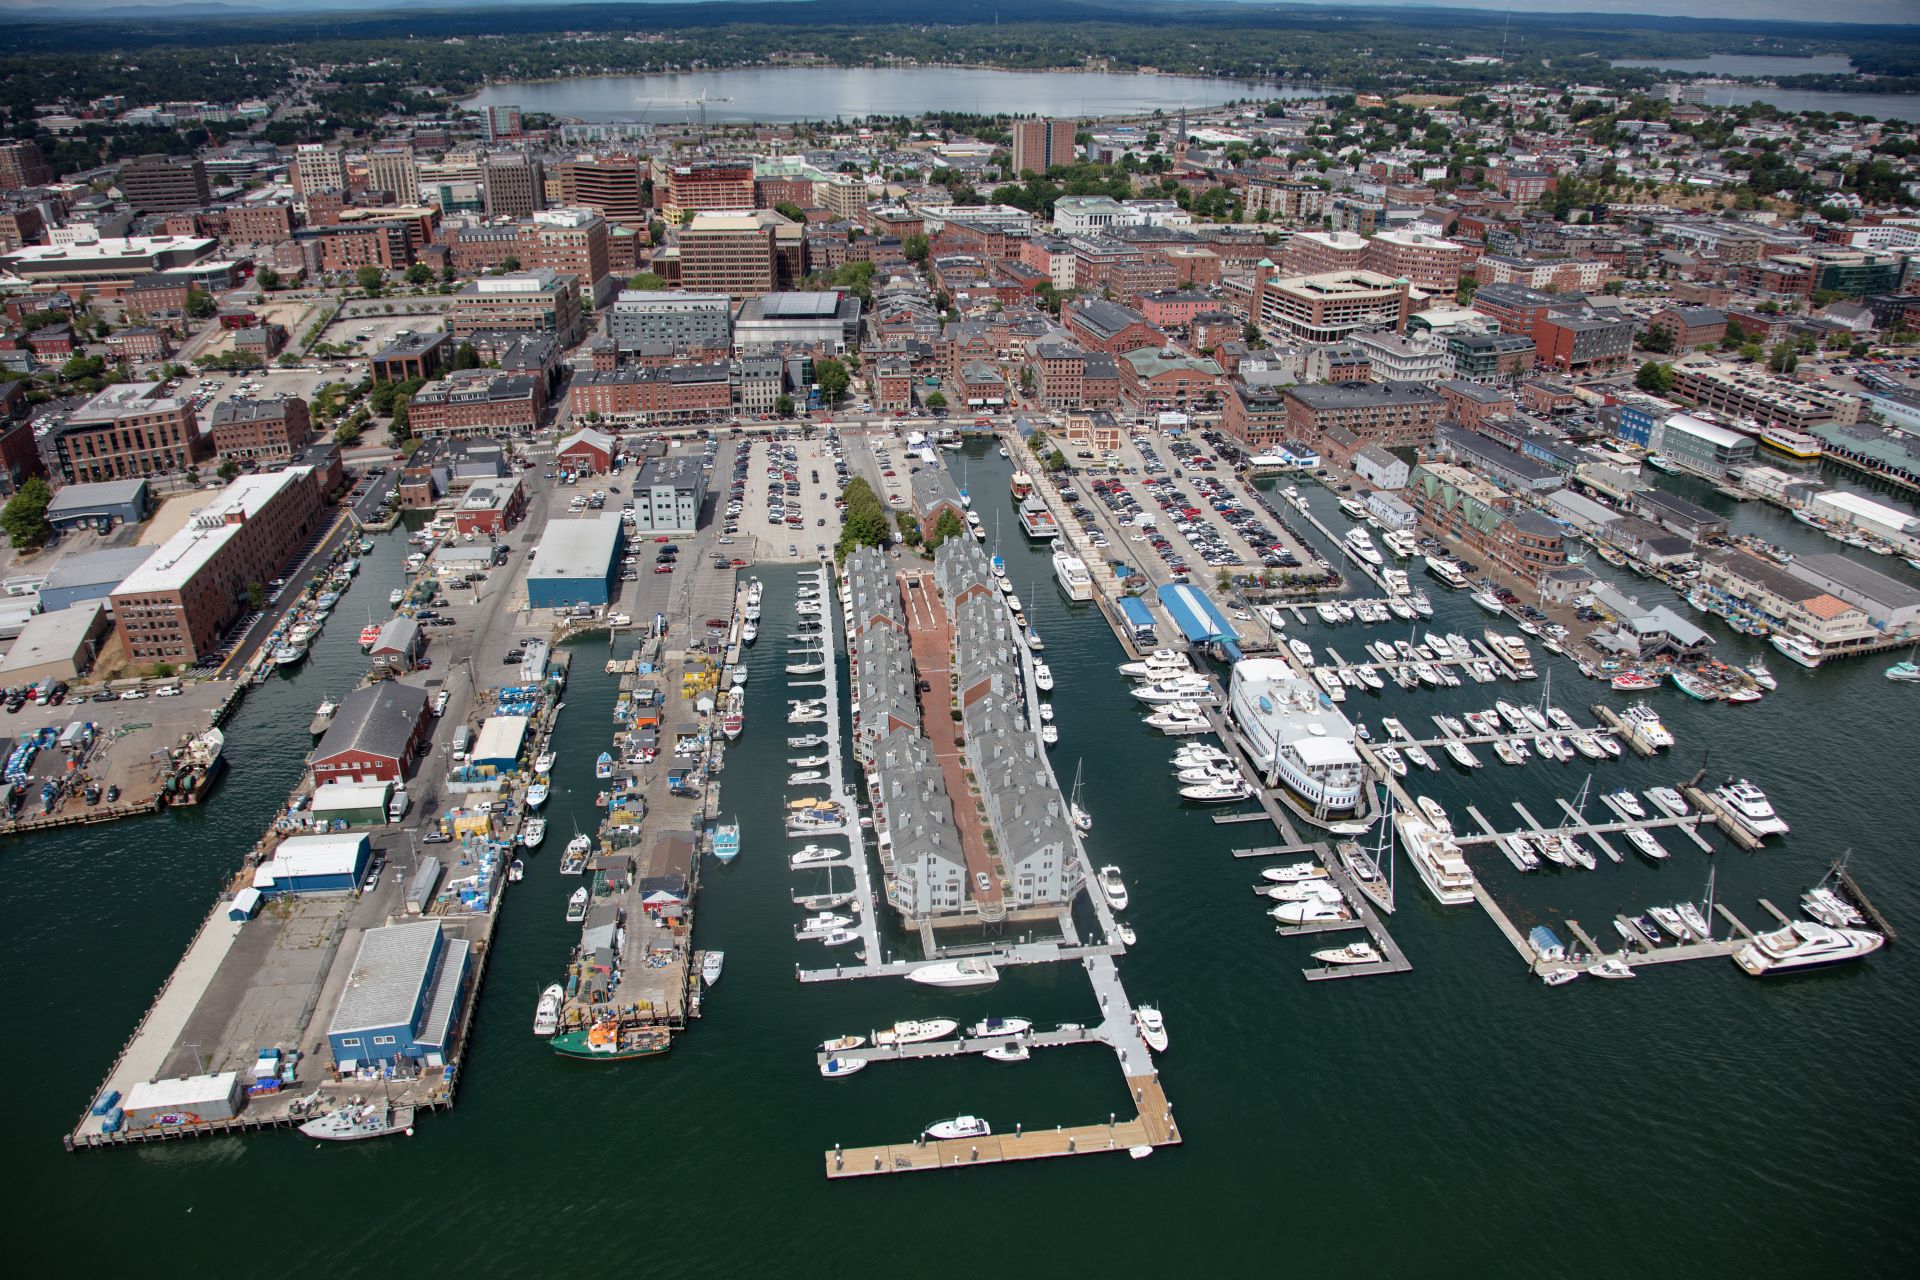 Aerial view of the businesses and parking lots in Portland surrounded by water